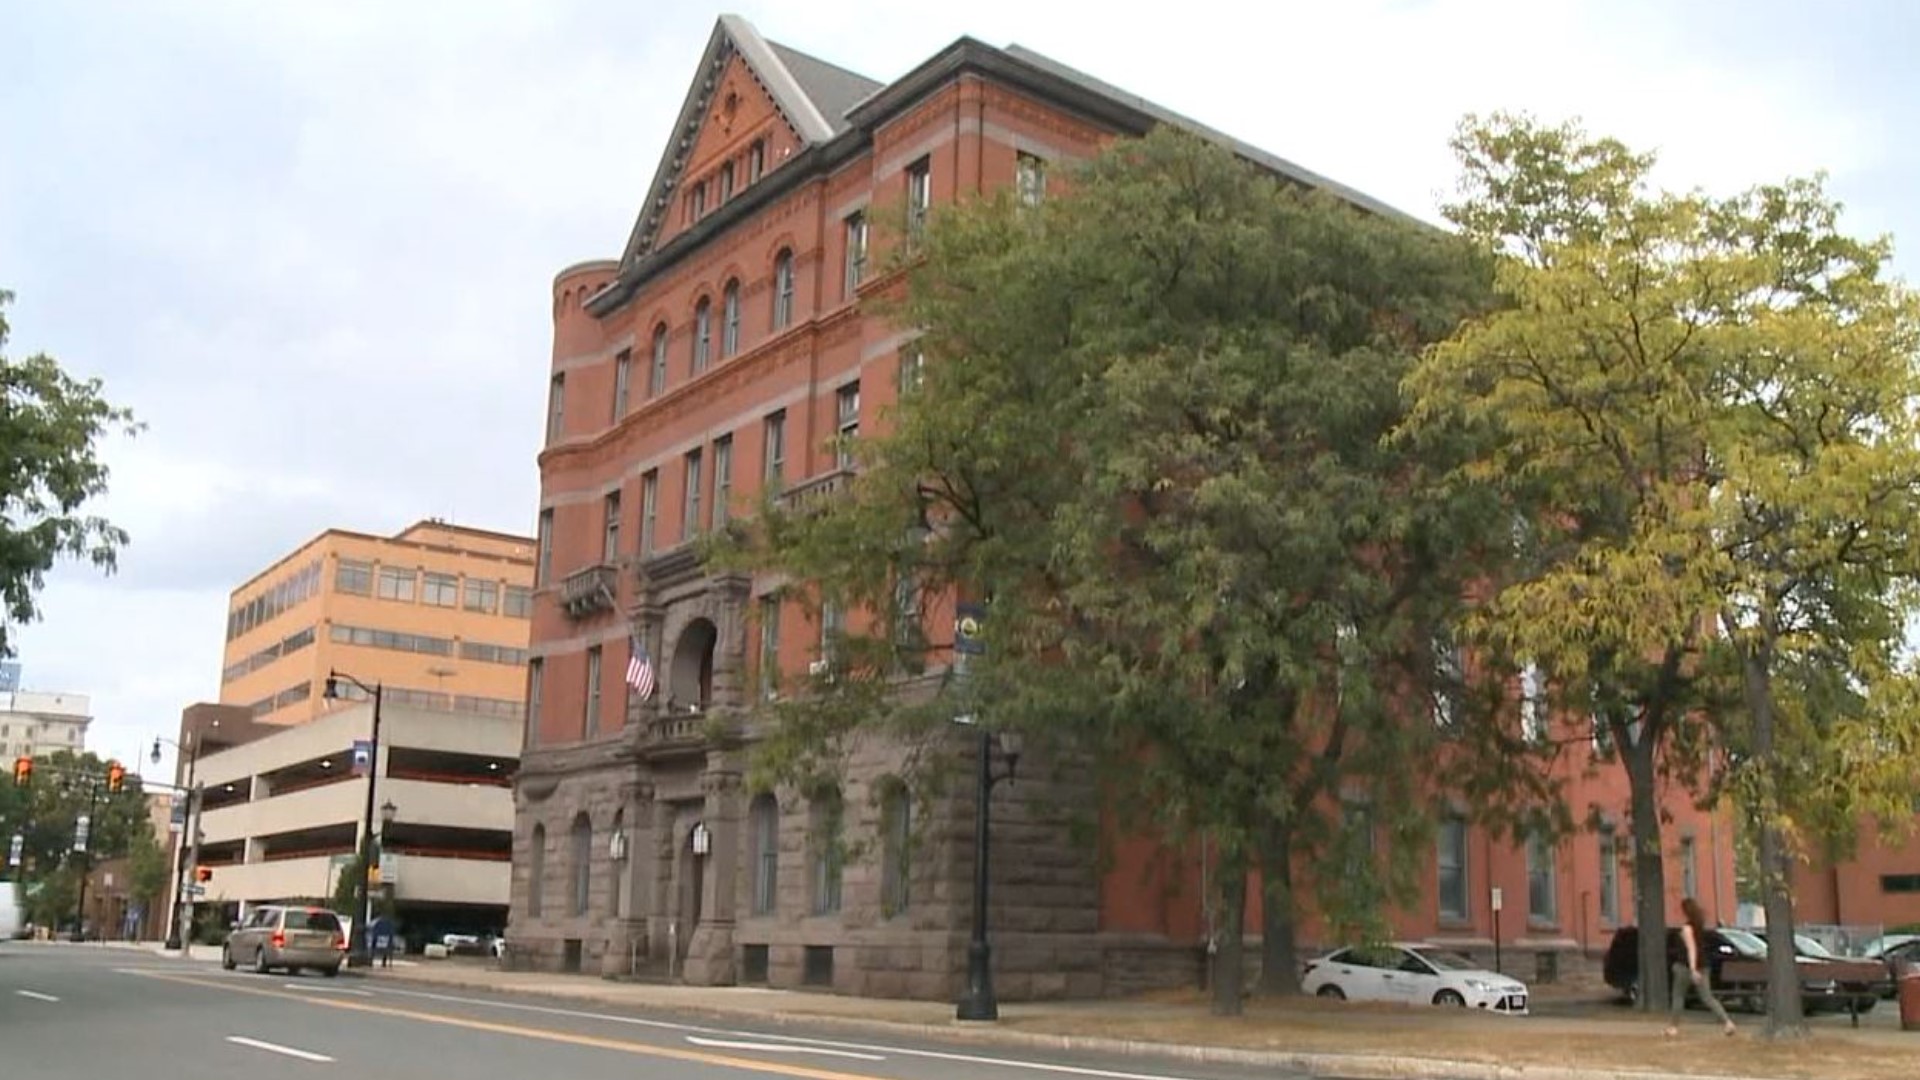 Wilkes-Barre City Hall is closed for the rest of the week after a worker tested positive for COVID-19.